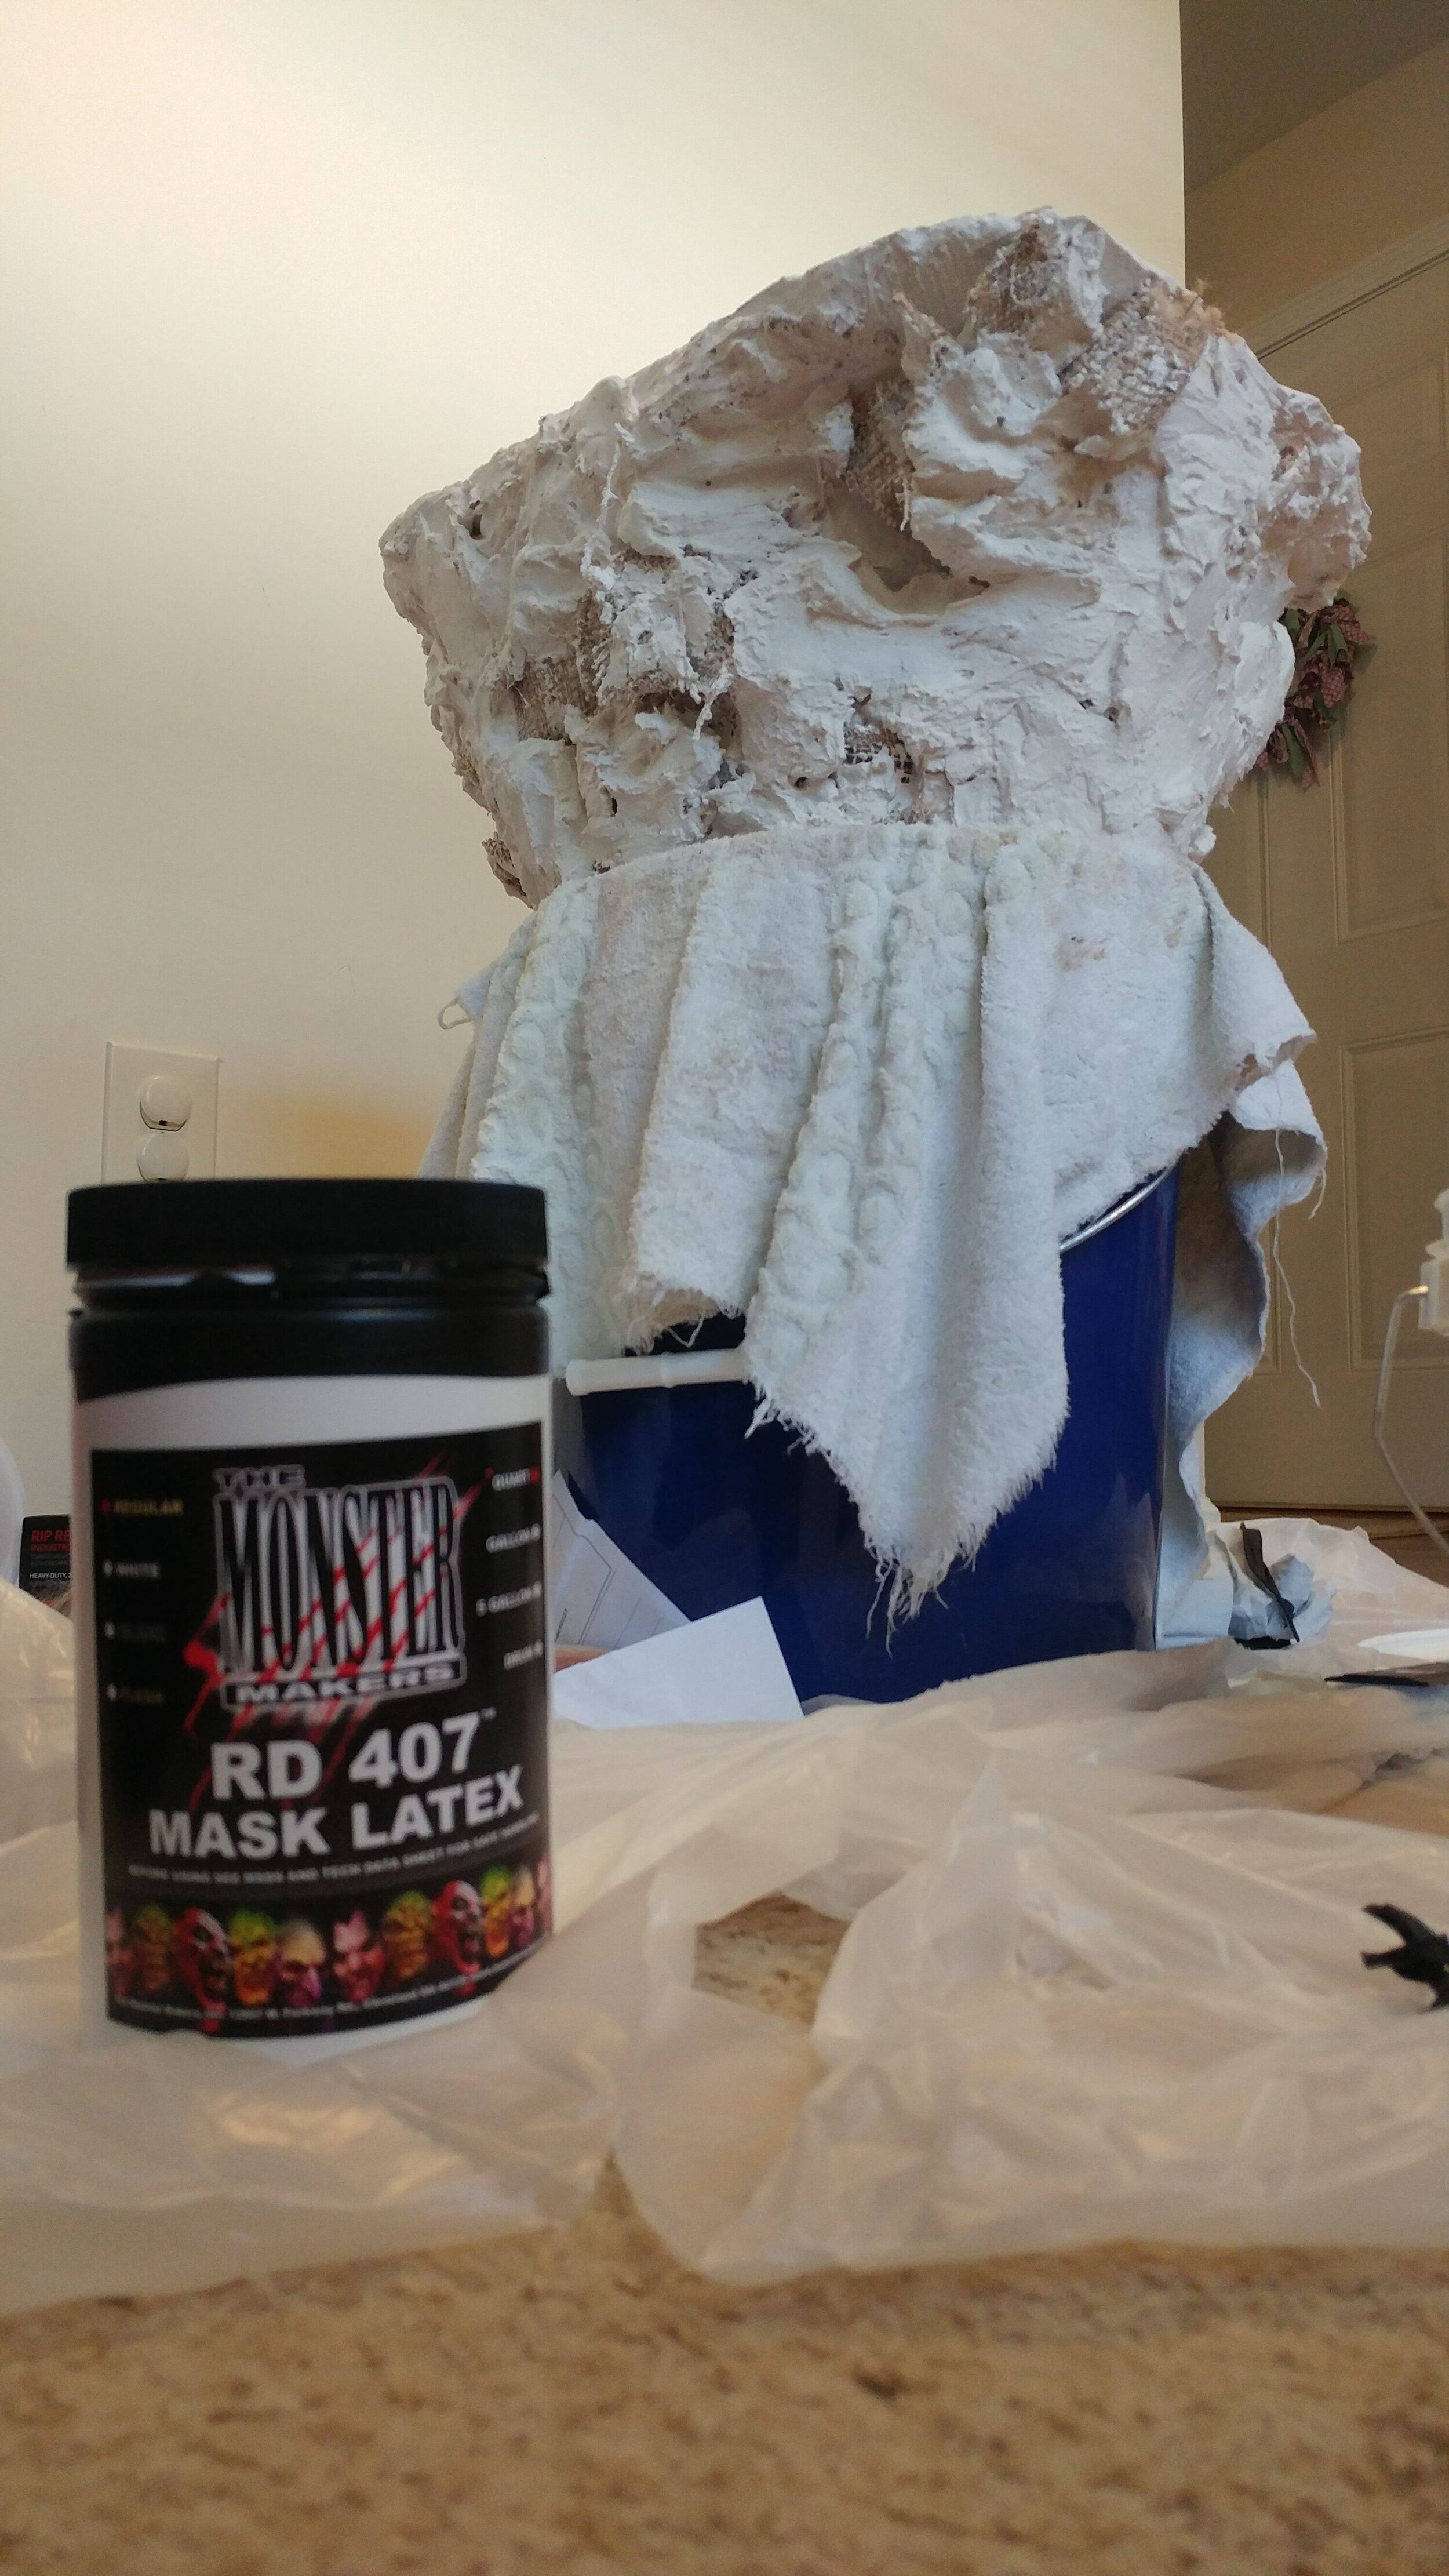 THE source for Special Effects, Latex Mask Making Supplies & More